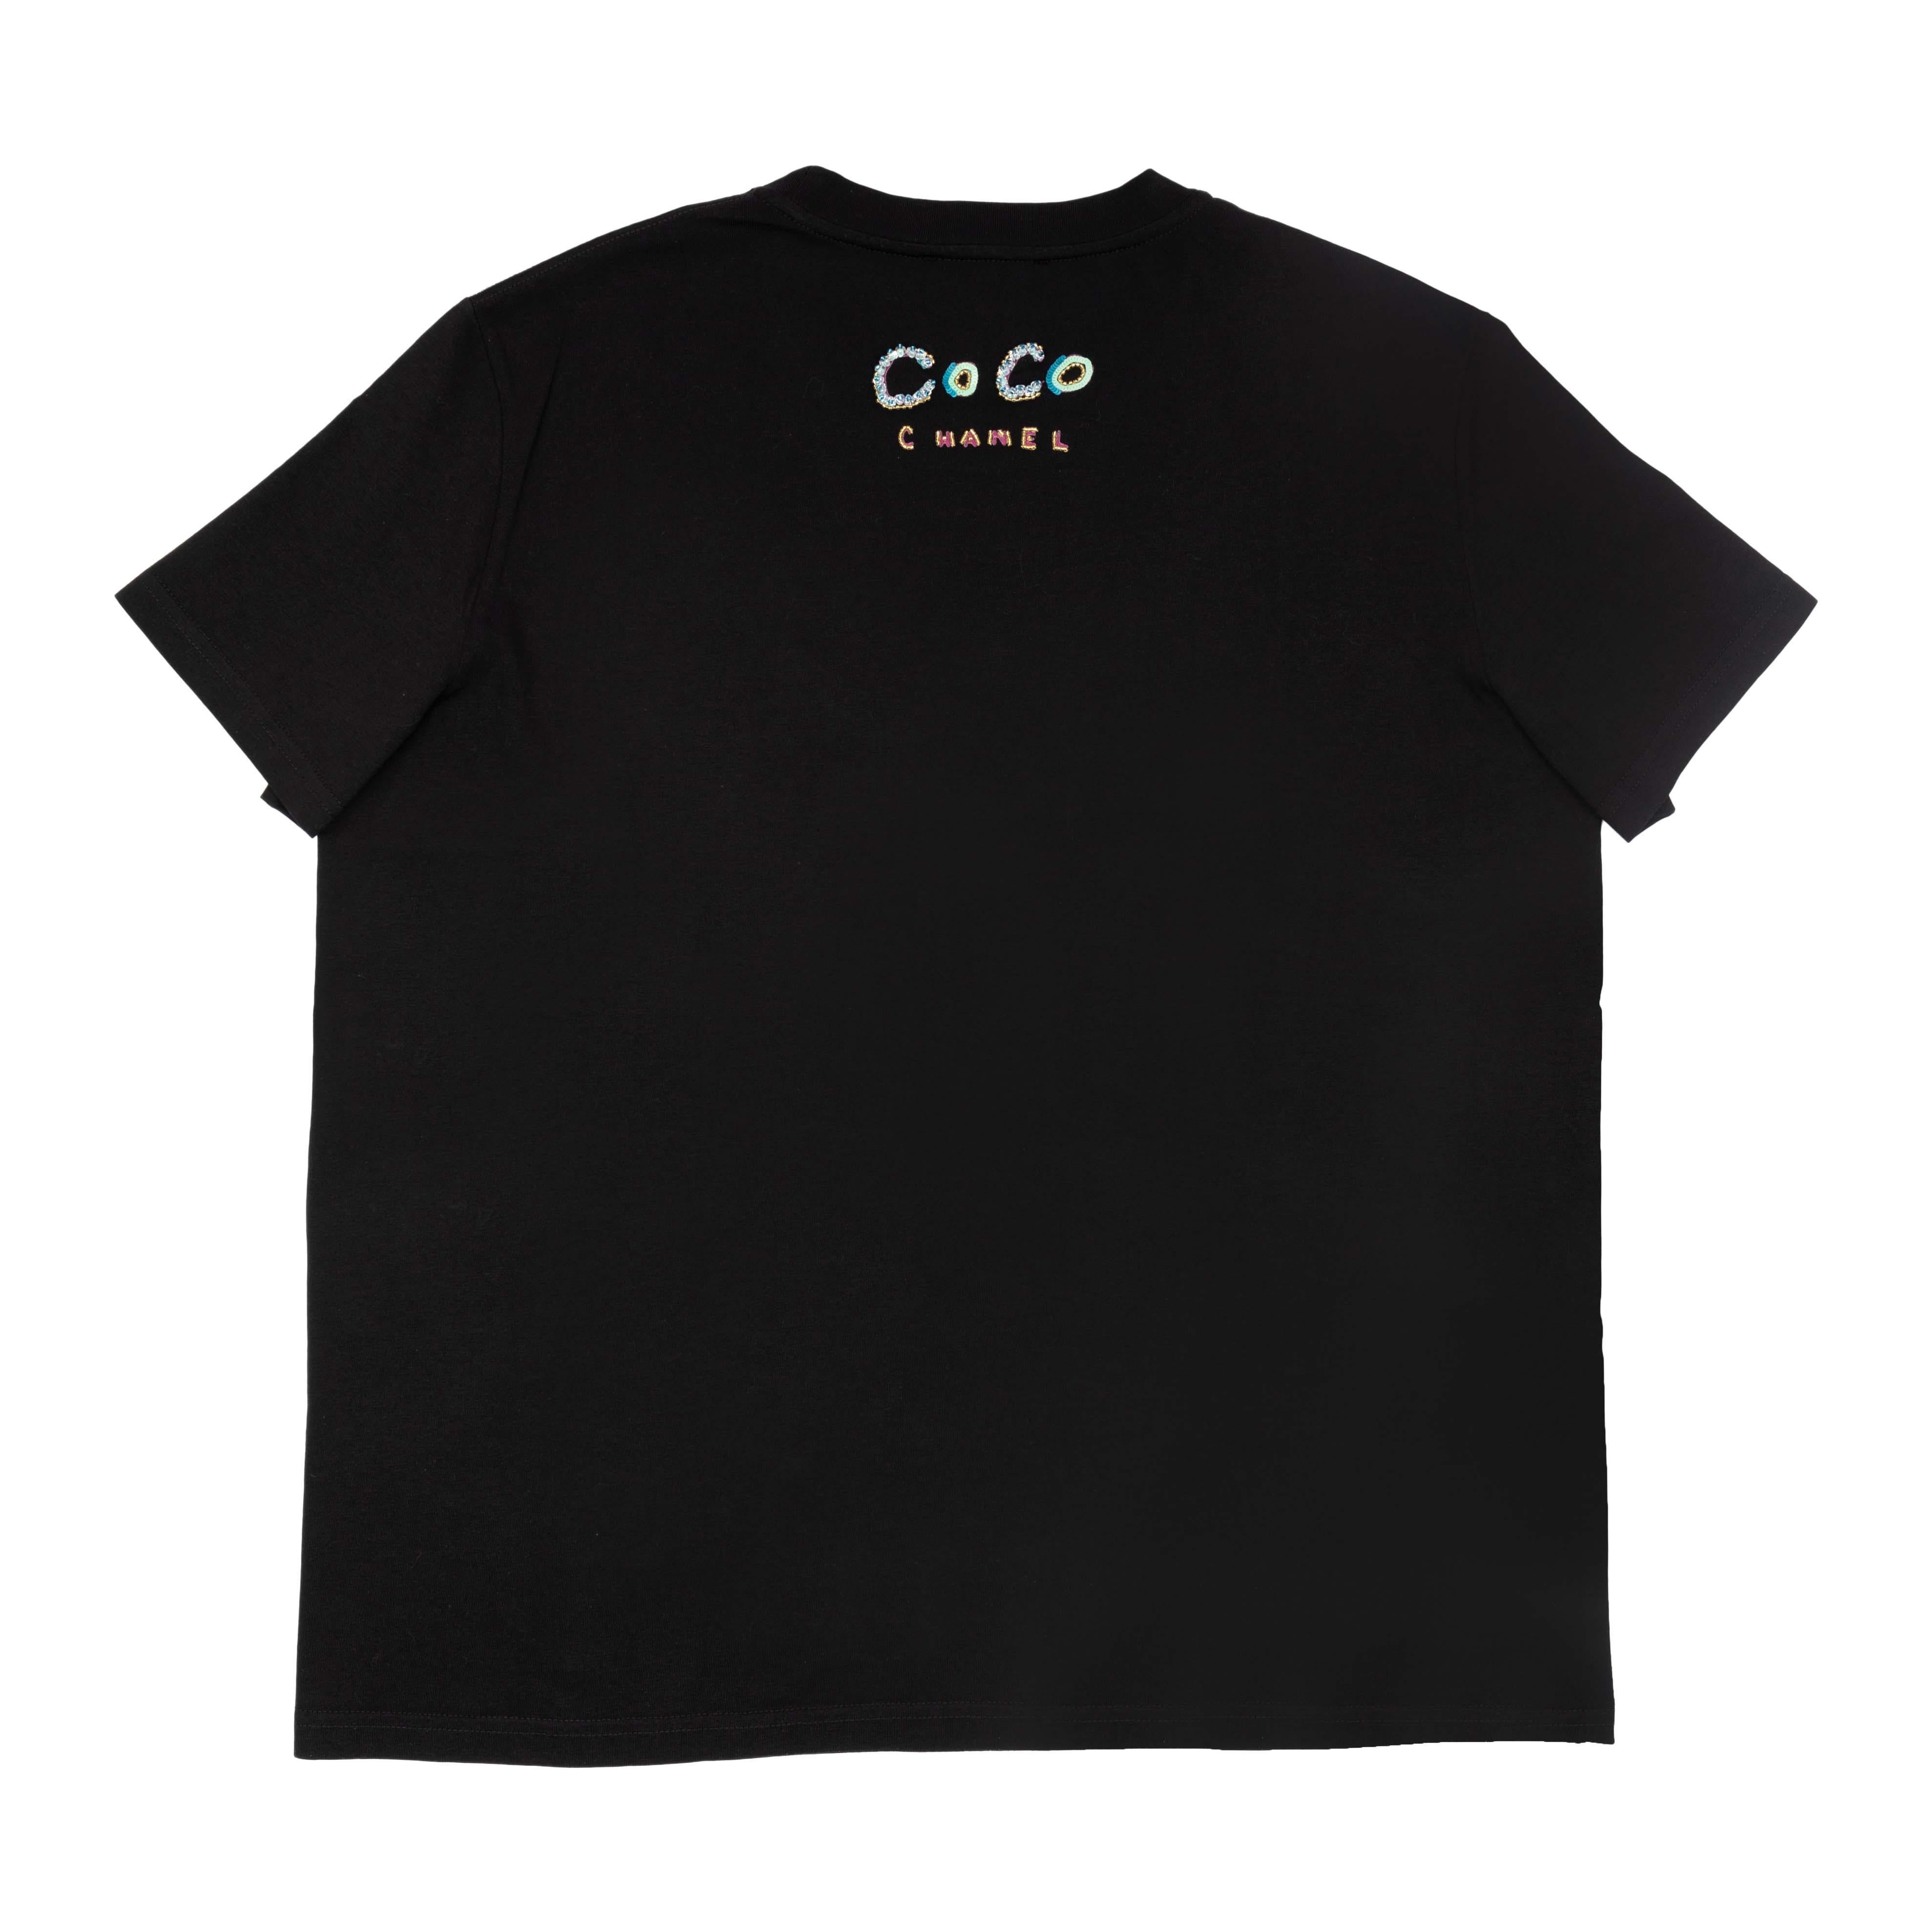 Imbue the playful spirit to your timeless closet with this Chanel x Pharrell Capsule Collection Black Embellished Cotton Short Sleeve T-Shirt. This 2019 limited edition piece is embellished with beads and sequins for a bold touch.

NFT option